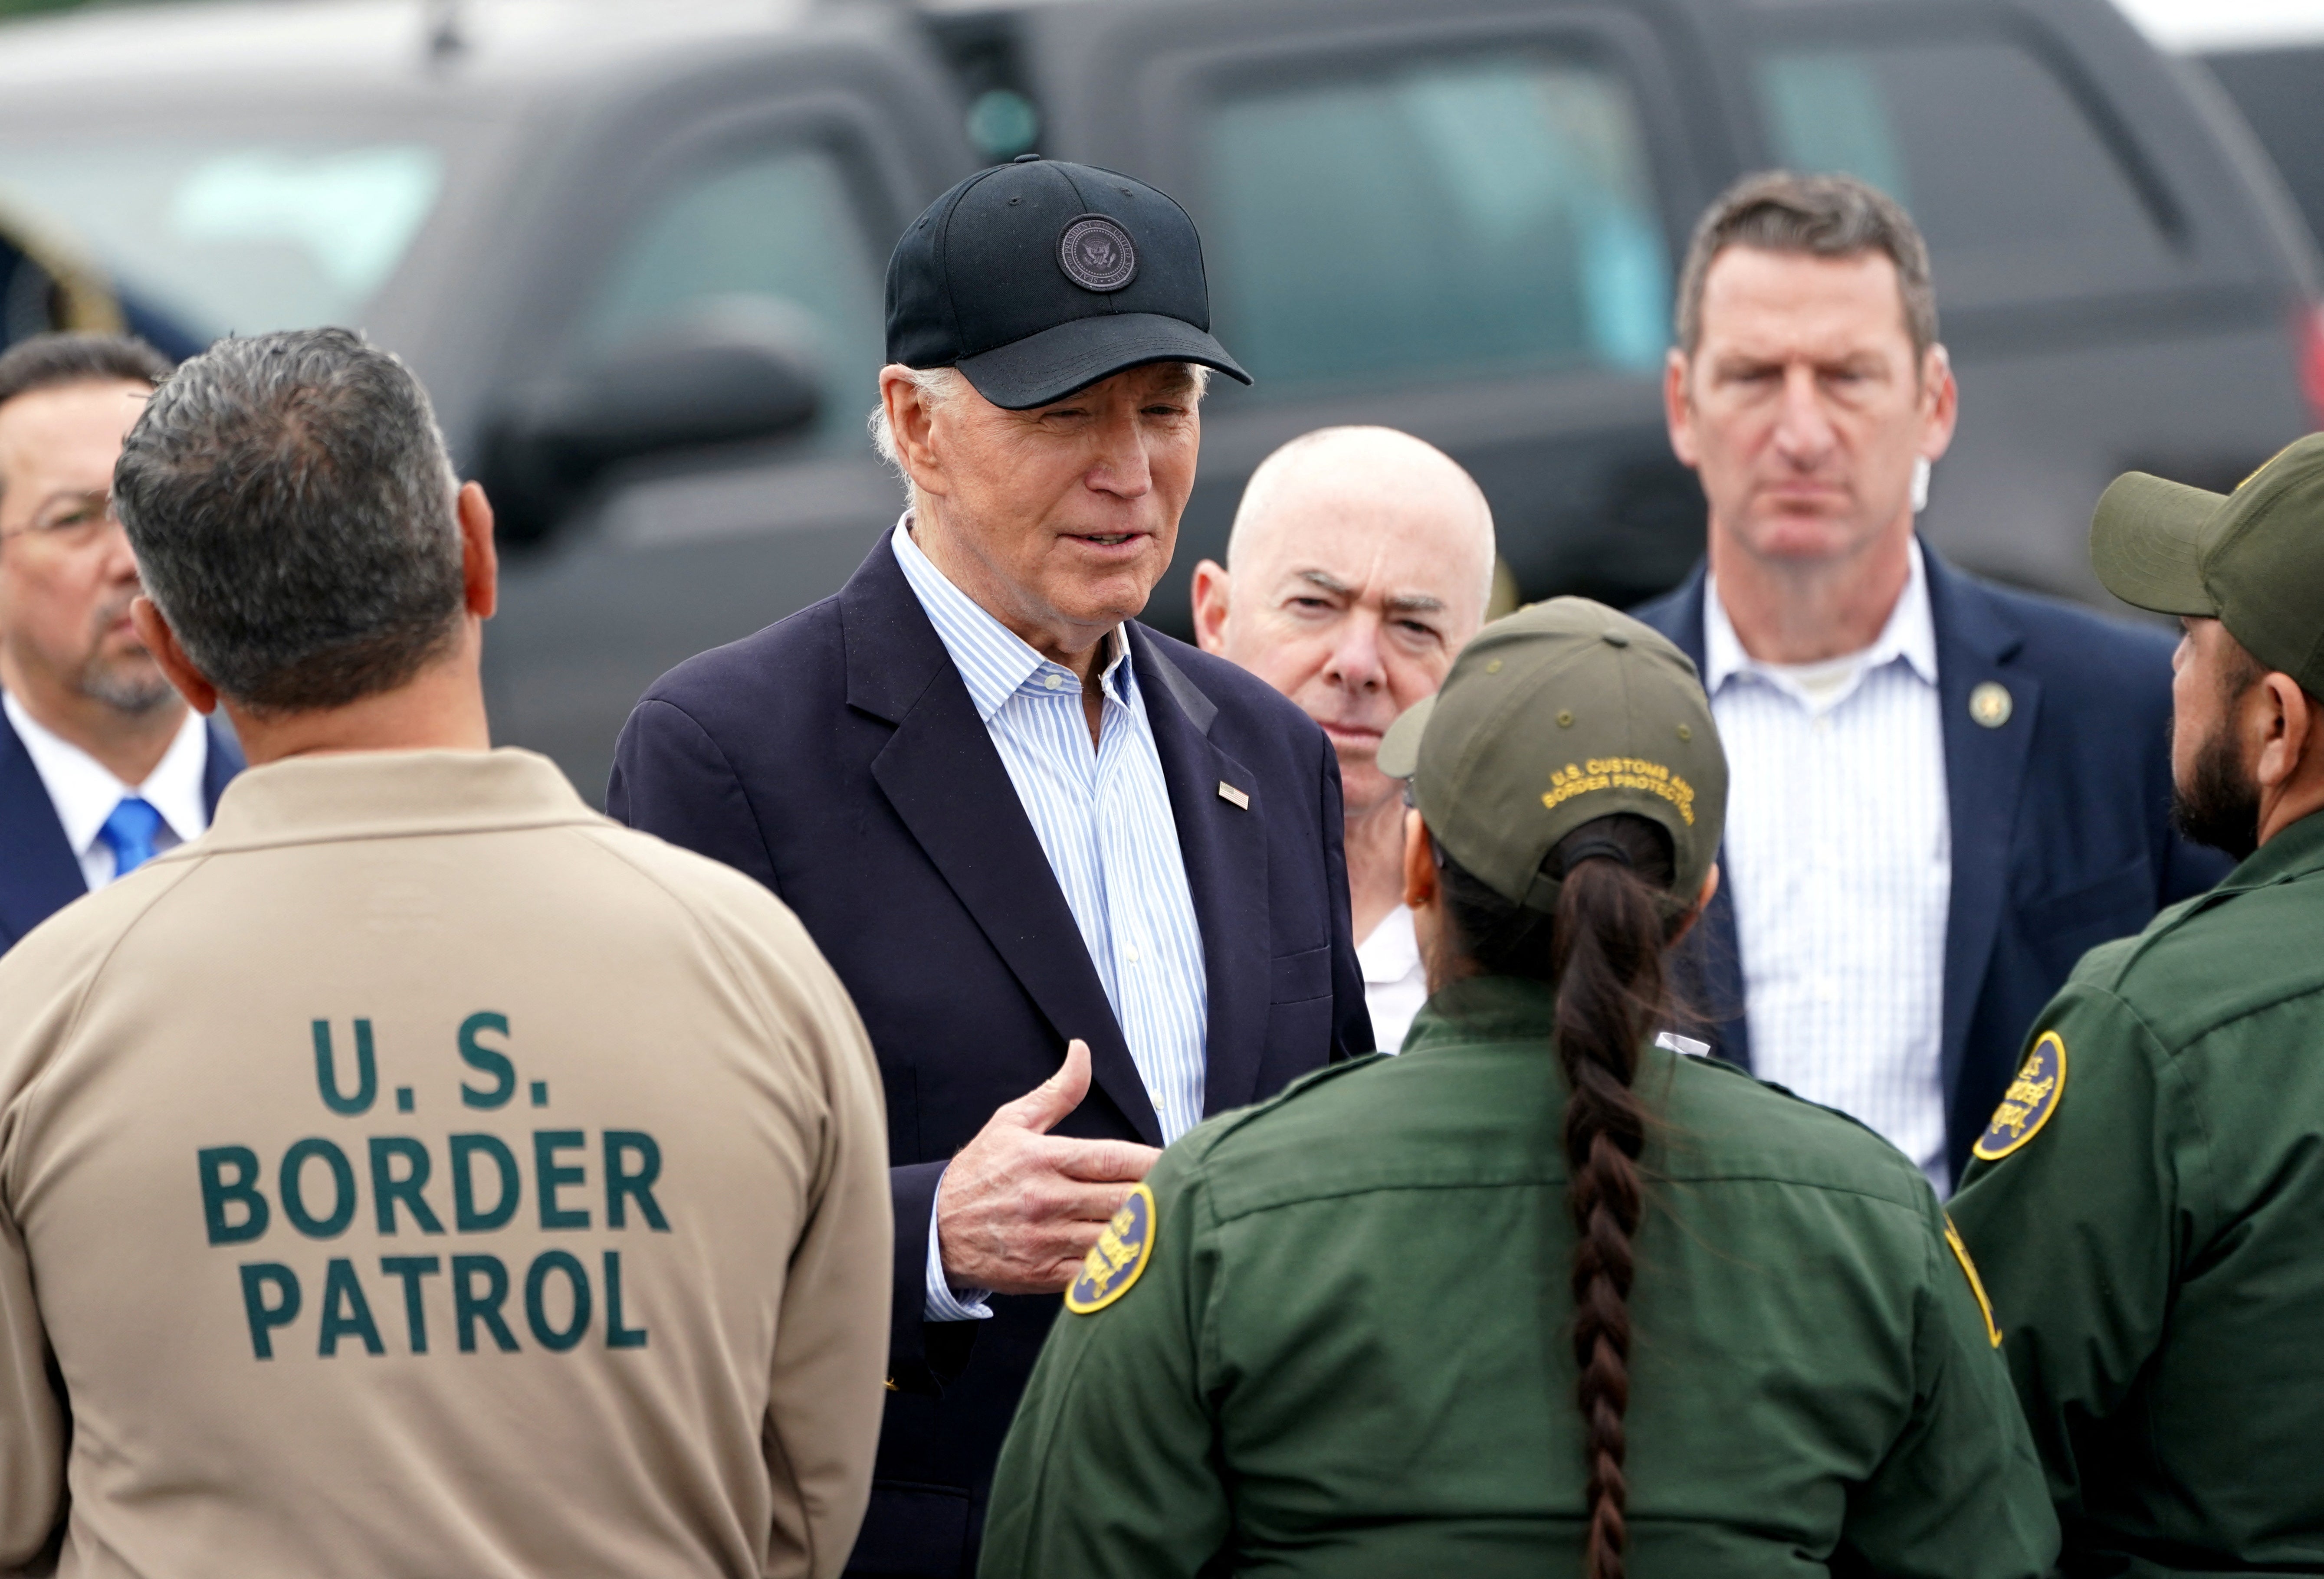 President Joe Biden, flanked by Homeland Security Secretary Alejandro Mayorkas, receives a briefing at the US-Mexico border in Brownsville, Texas